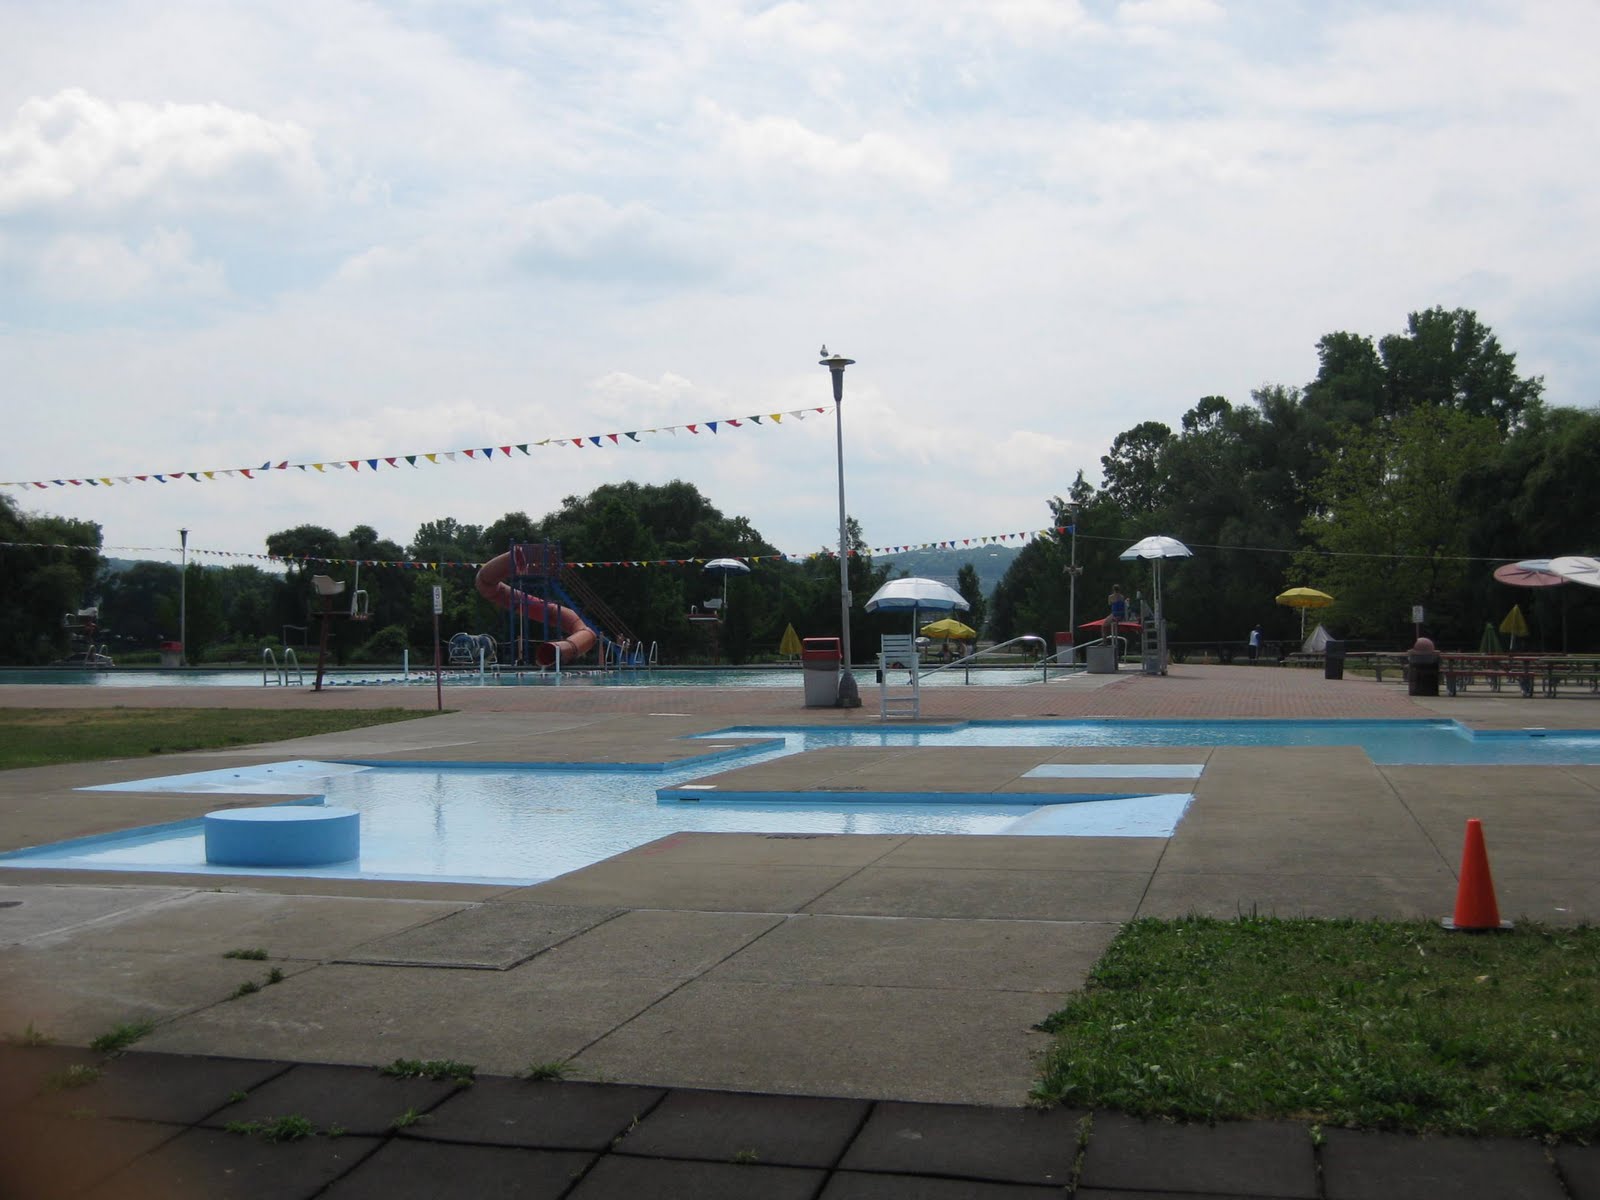 fithaca - Fitness and Recreation in Ithaca: Outdoor swimming in Ithaca